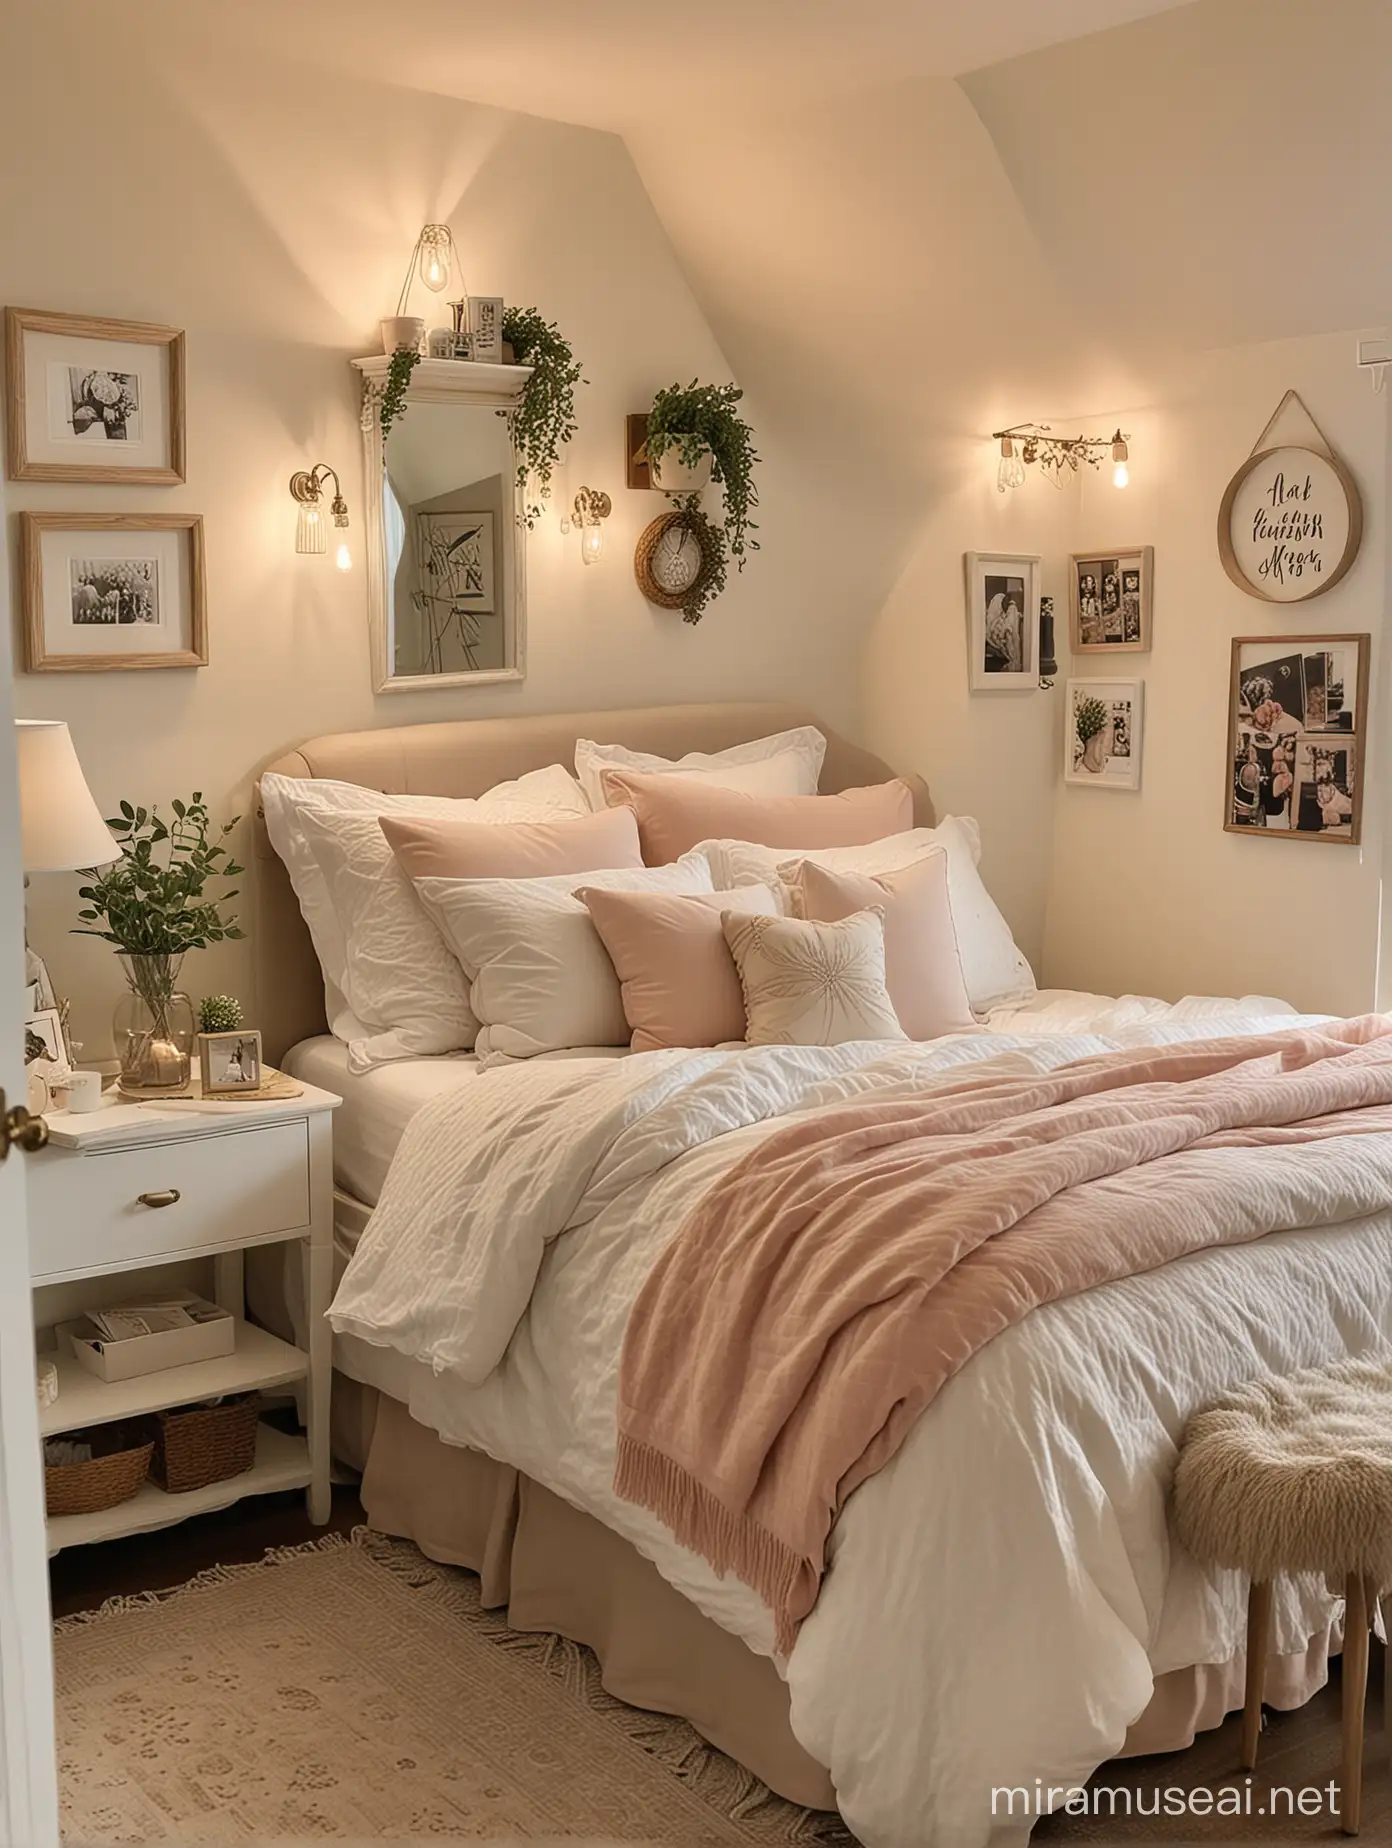 A charming solo bedroom haven exuding comfort and charm, with a cozy bed nook, soft lighting, and curated decor elements for a cozy and inviting atmosphere.